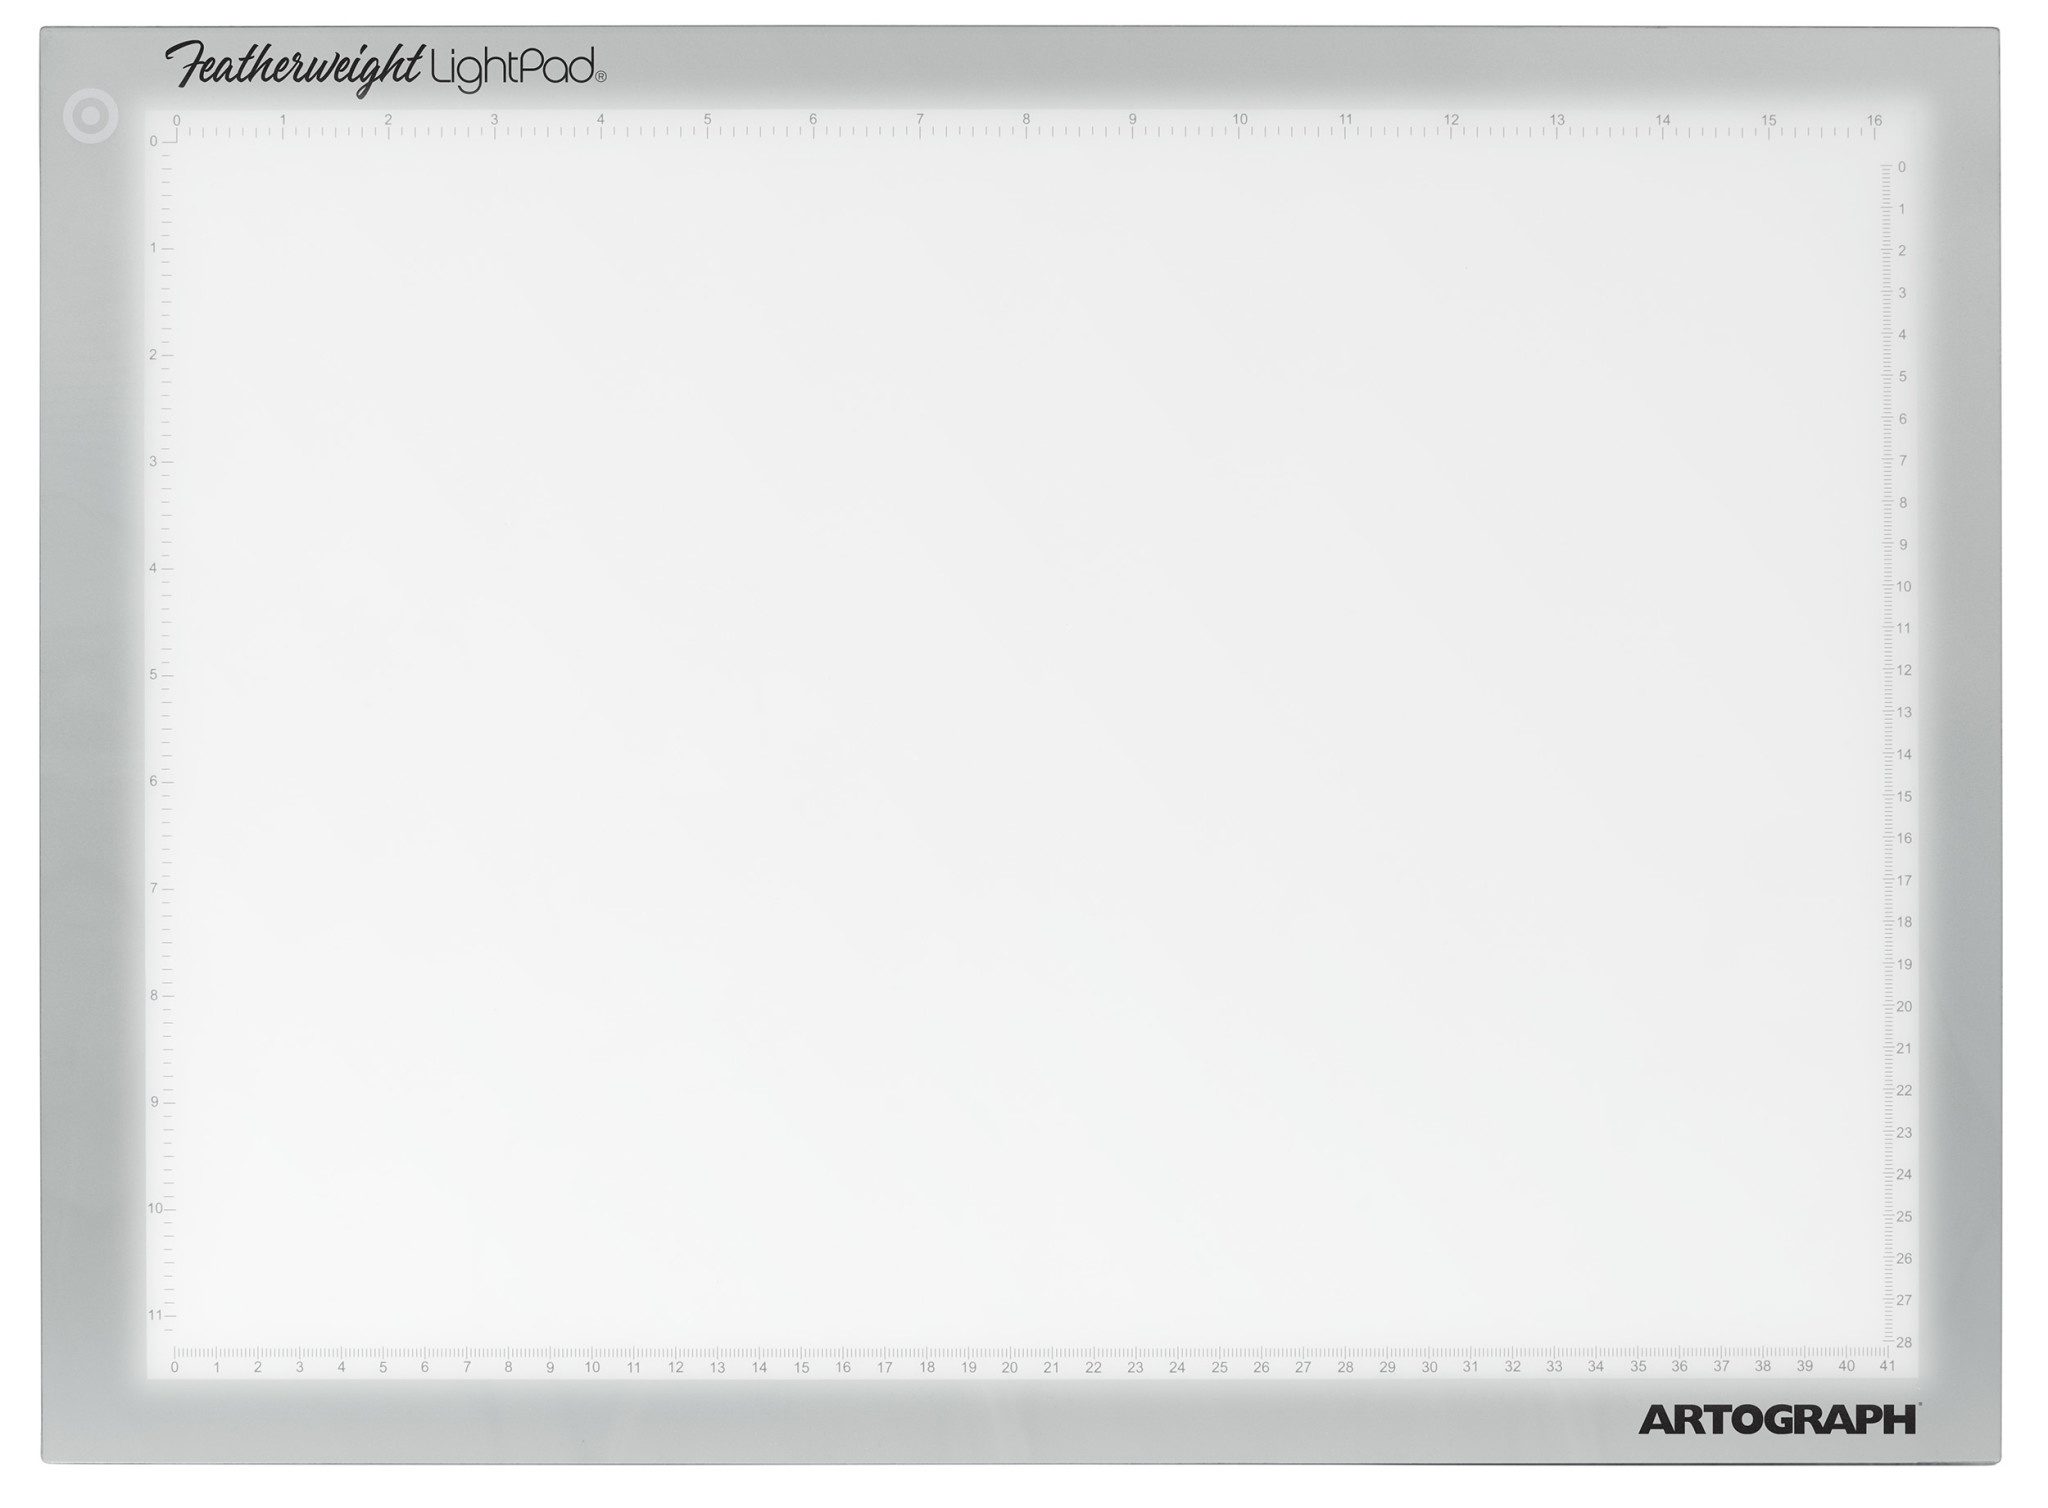 Featherweight 12 x 17 Ultra-Thin, Dimmable Lightpad for Drawing and –  artograph